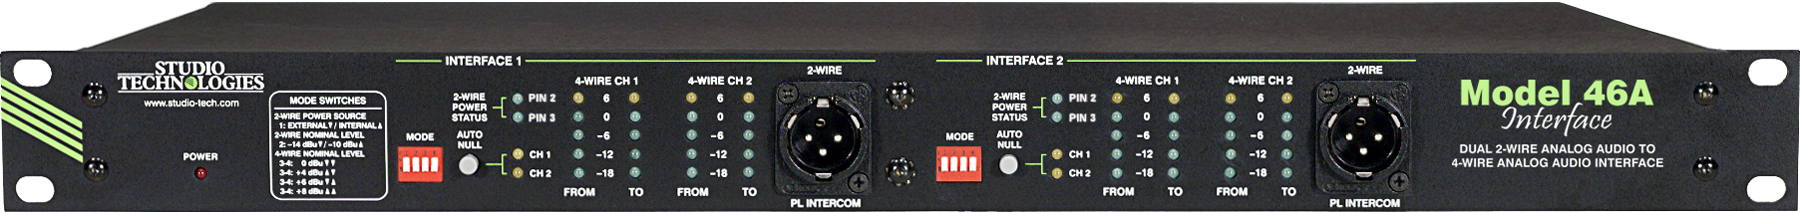 Model 46A Dual 2-Wire Analog Audio to 4-Wire Analog Audio Interface